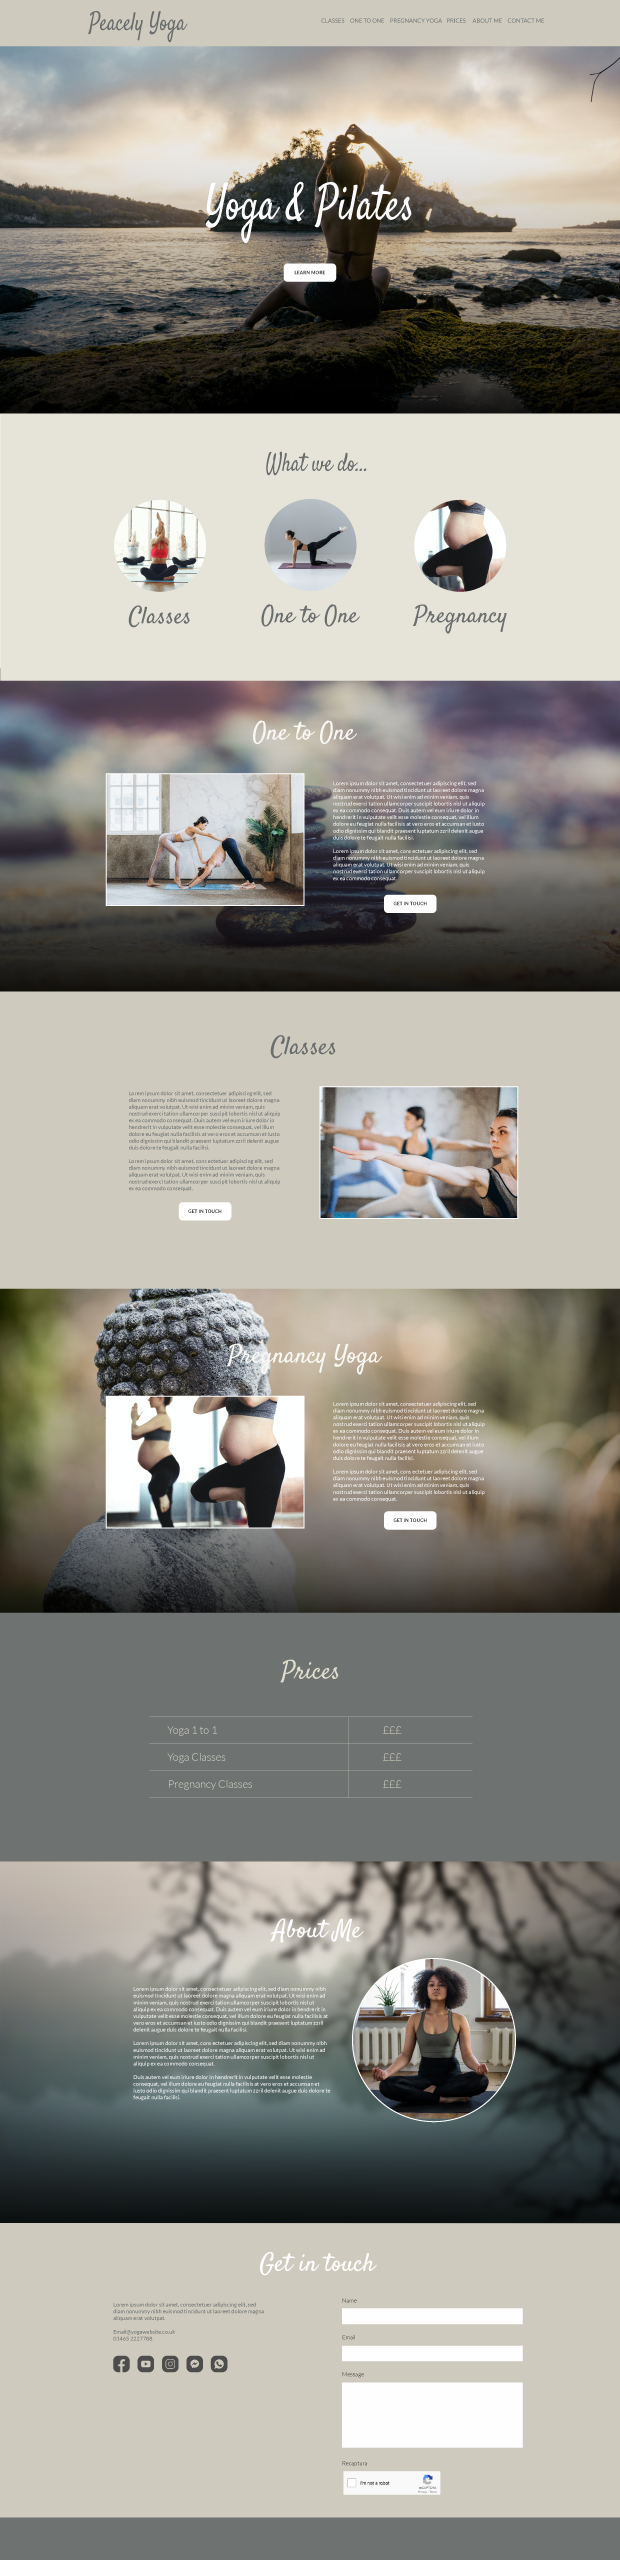 Example of a website designed for yoga or holistic practitioner